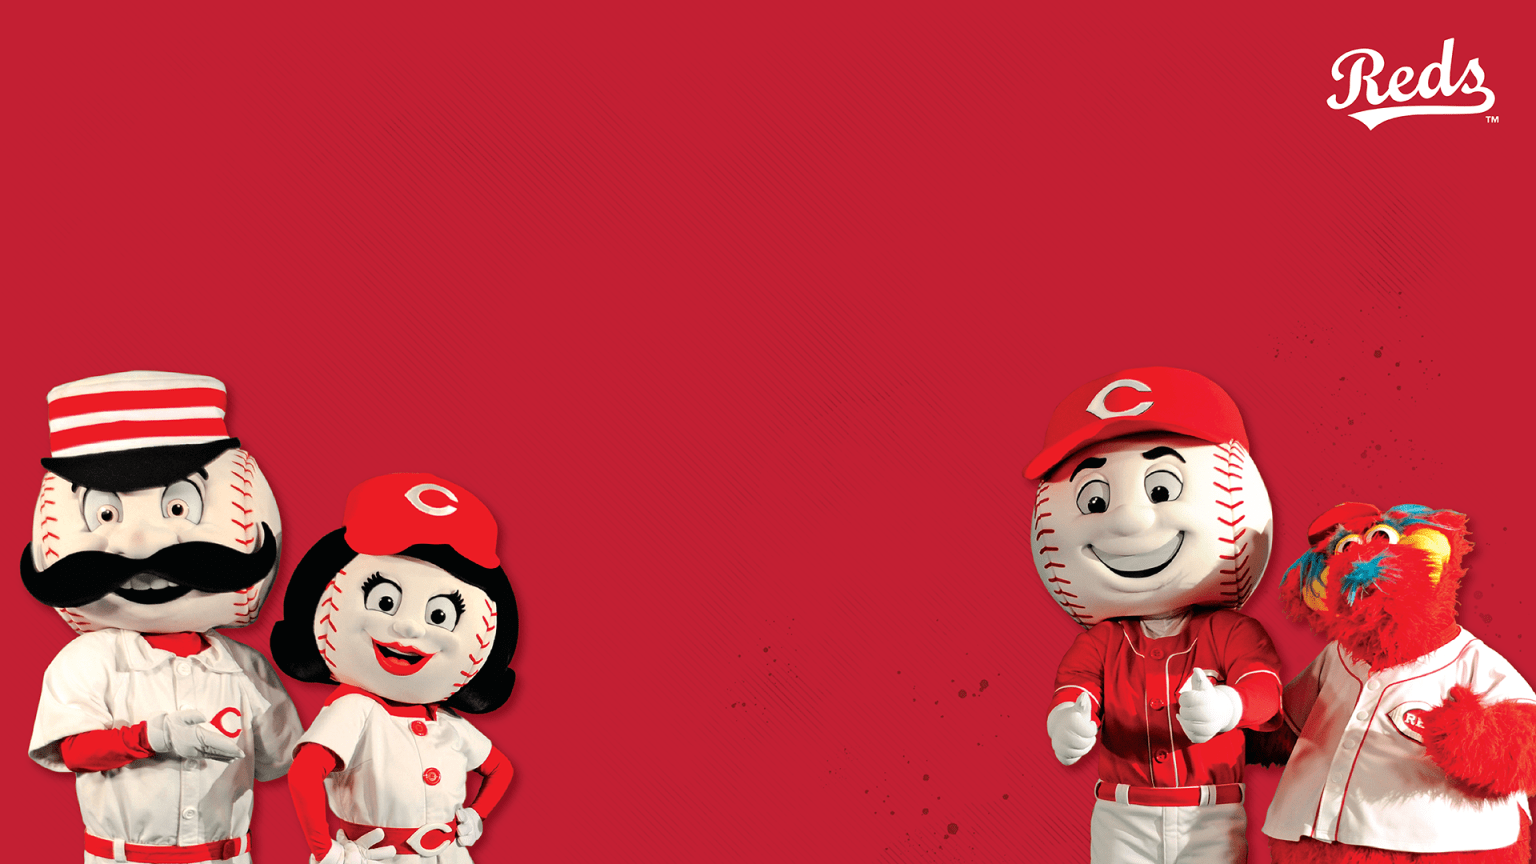 Reds Virtual Backgrounds